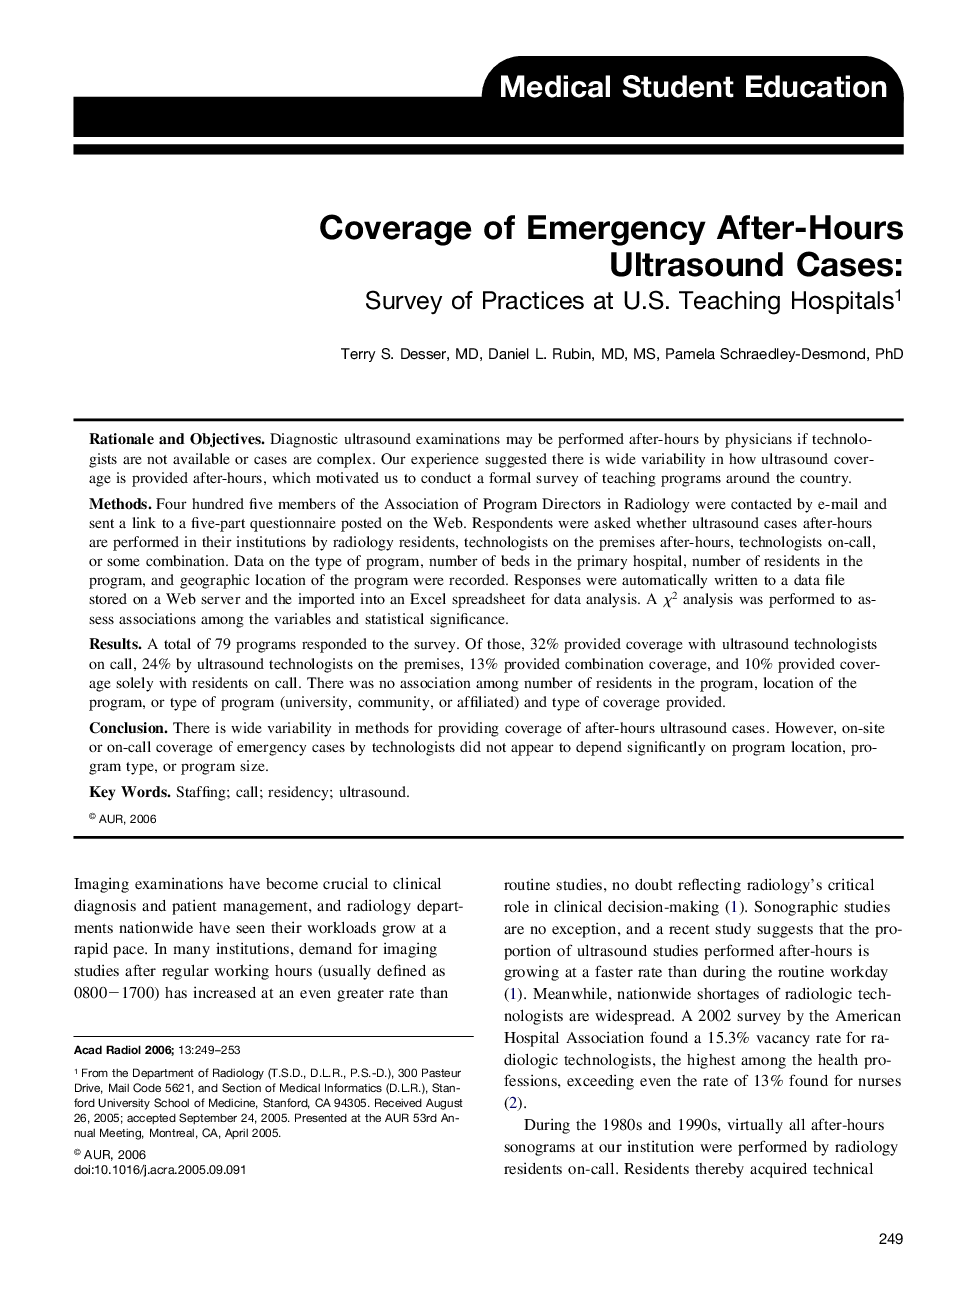 Coverage of Emergency After-Hours Ultrasound Cases